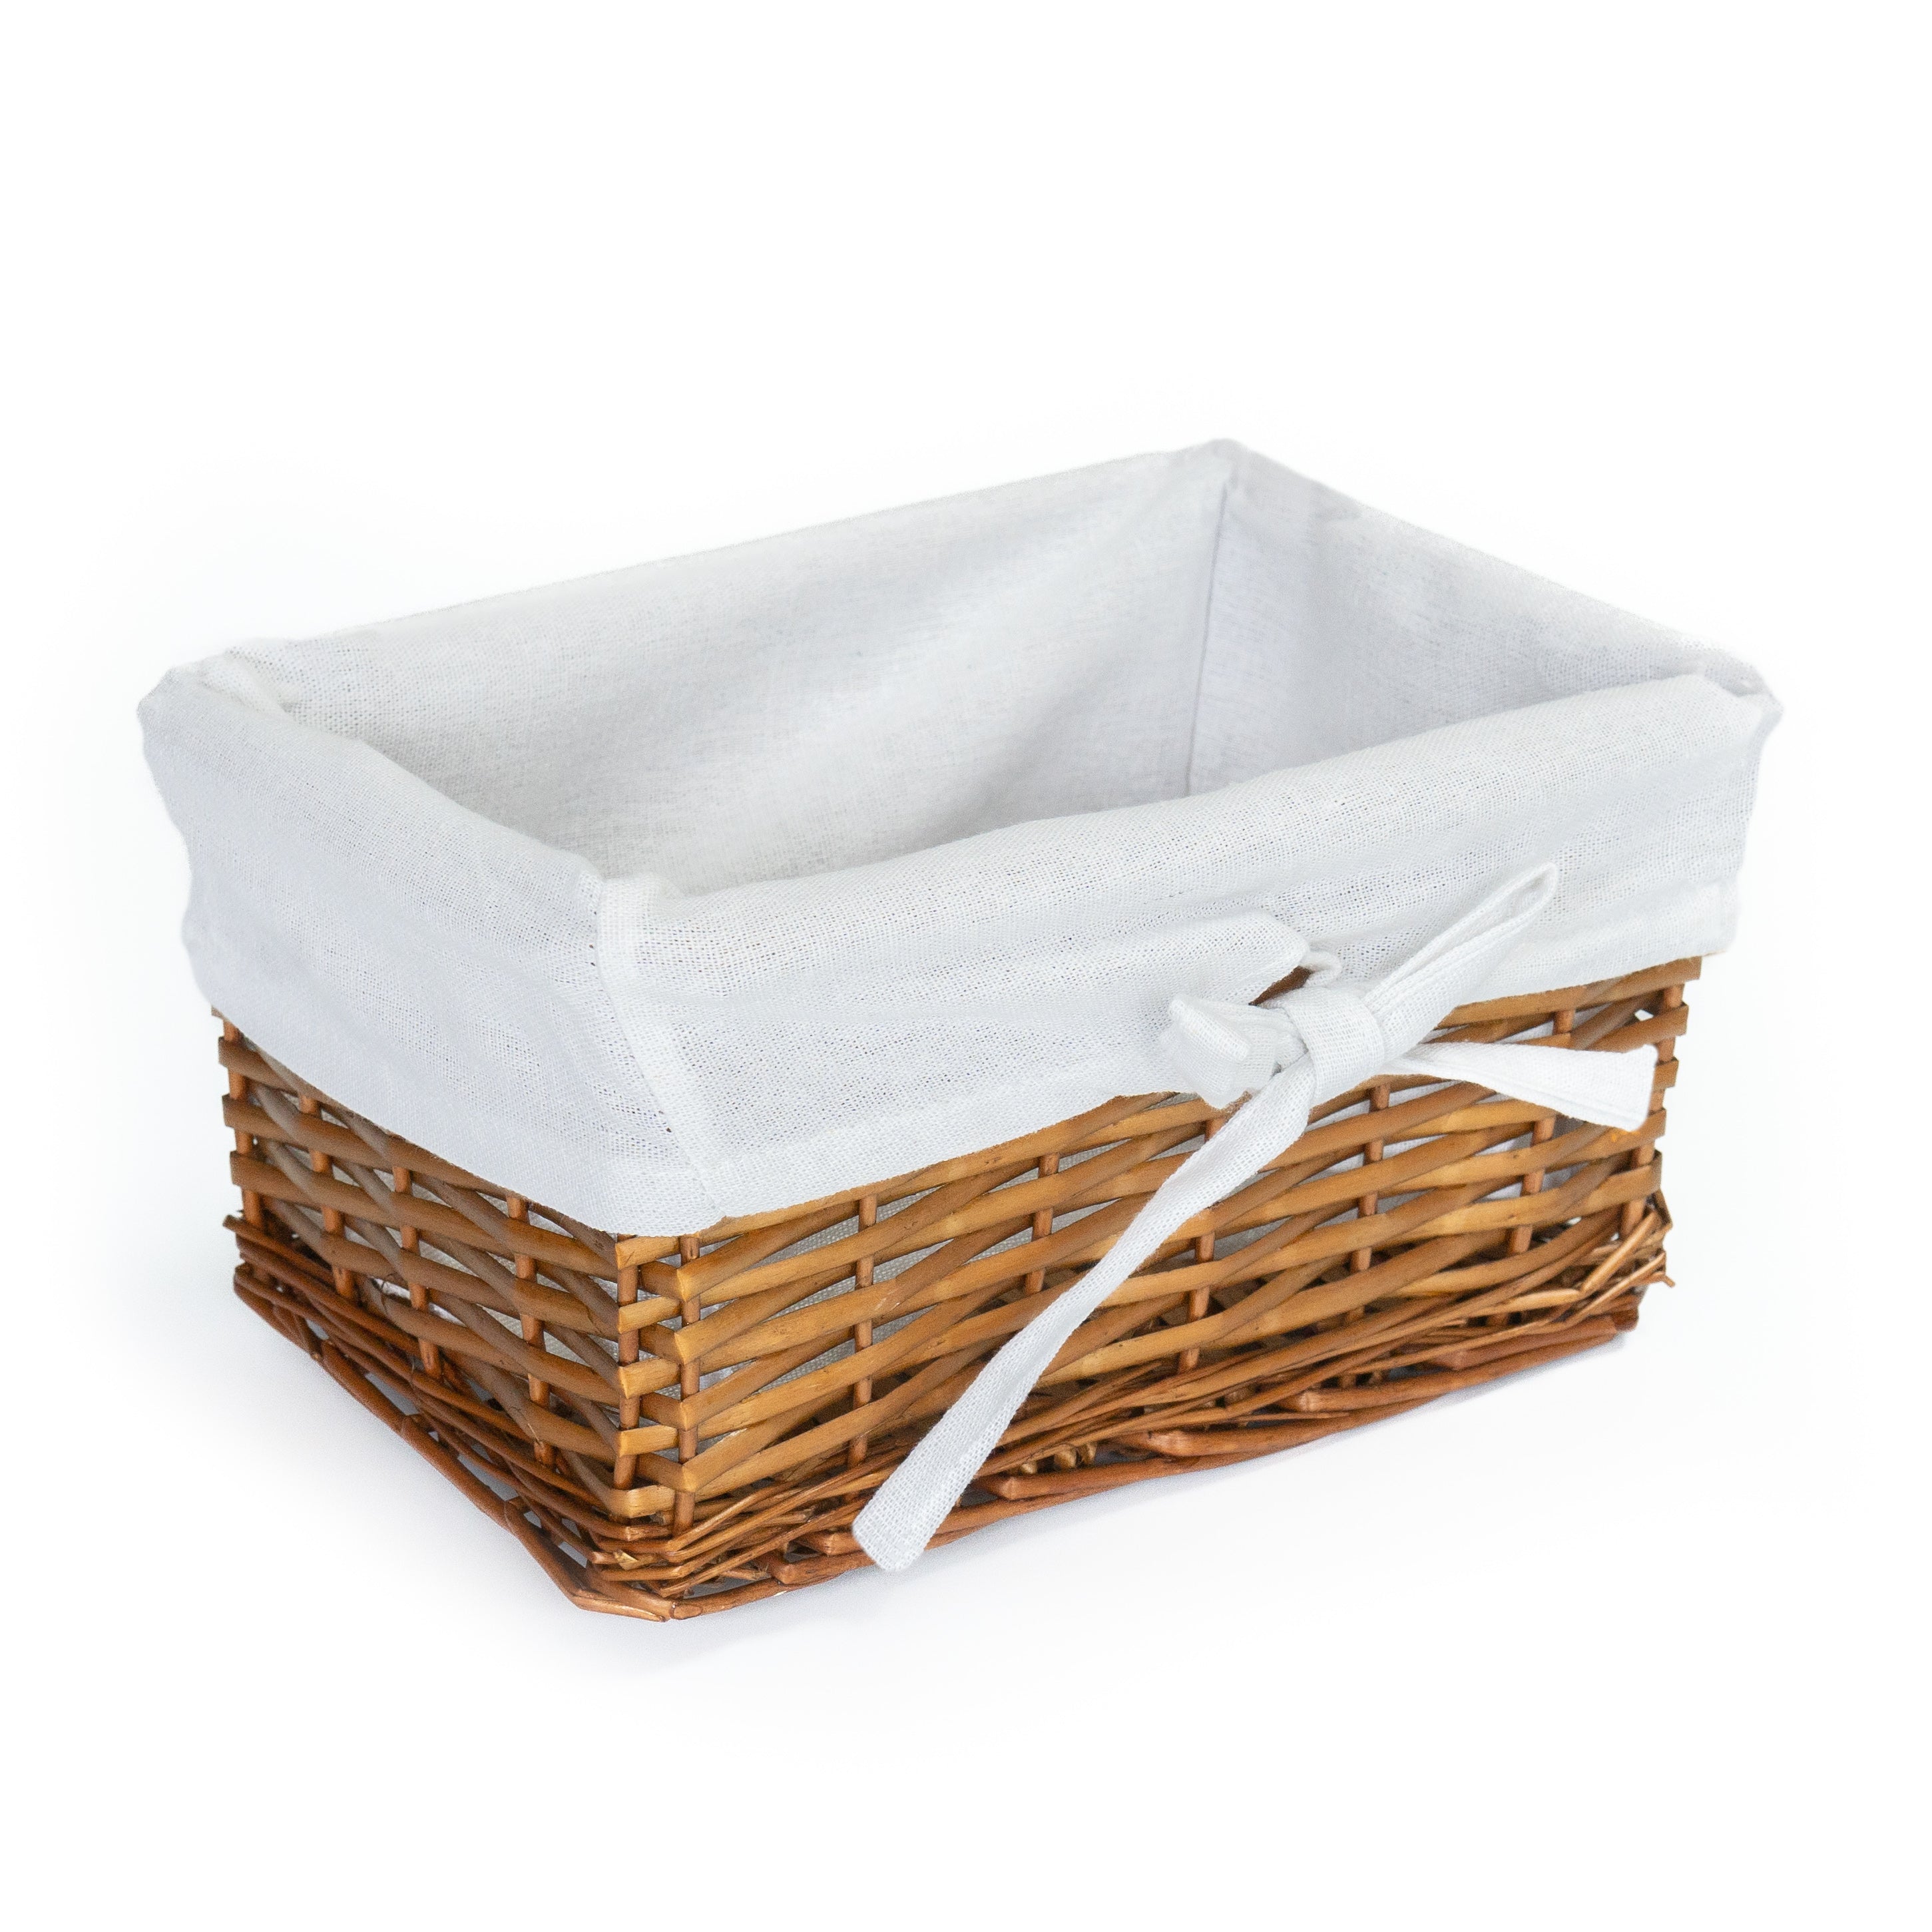 Distilled Brown Small Wicker Tray